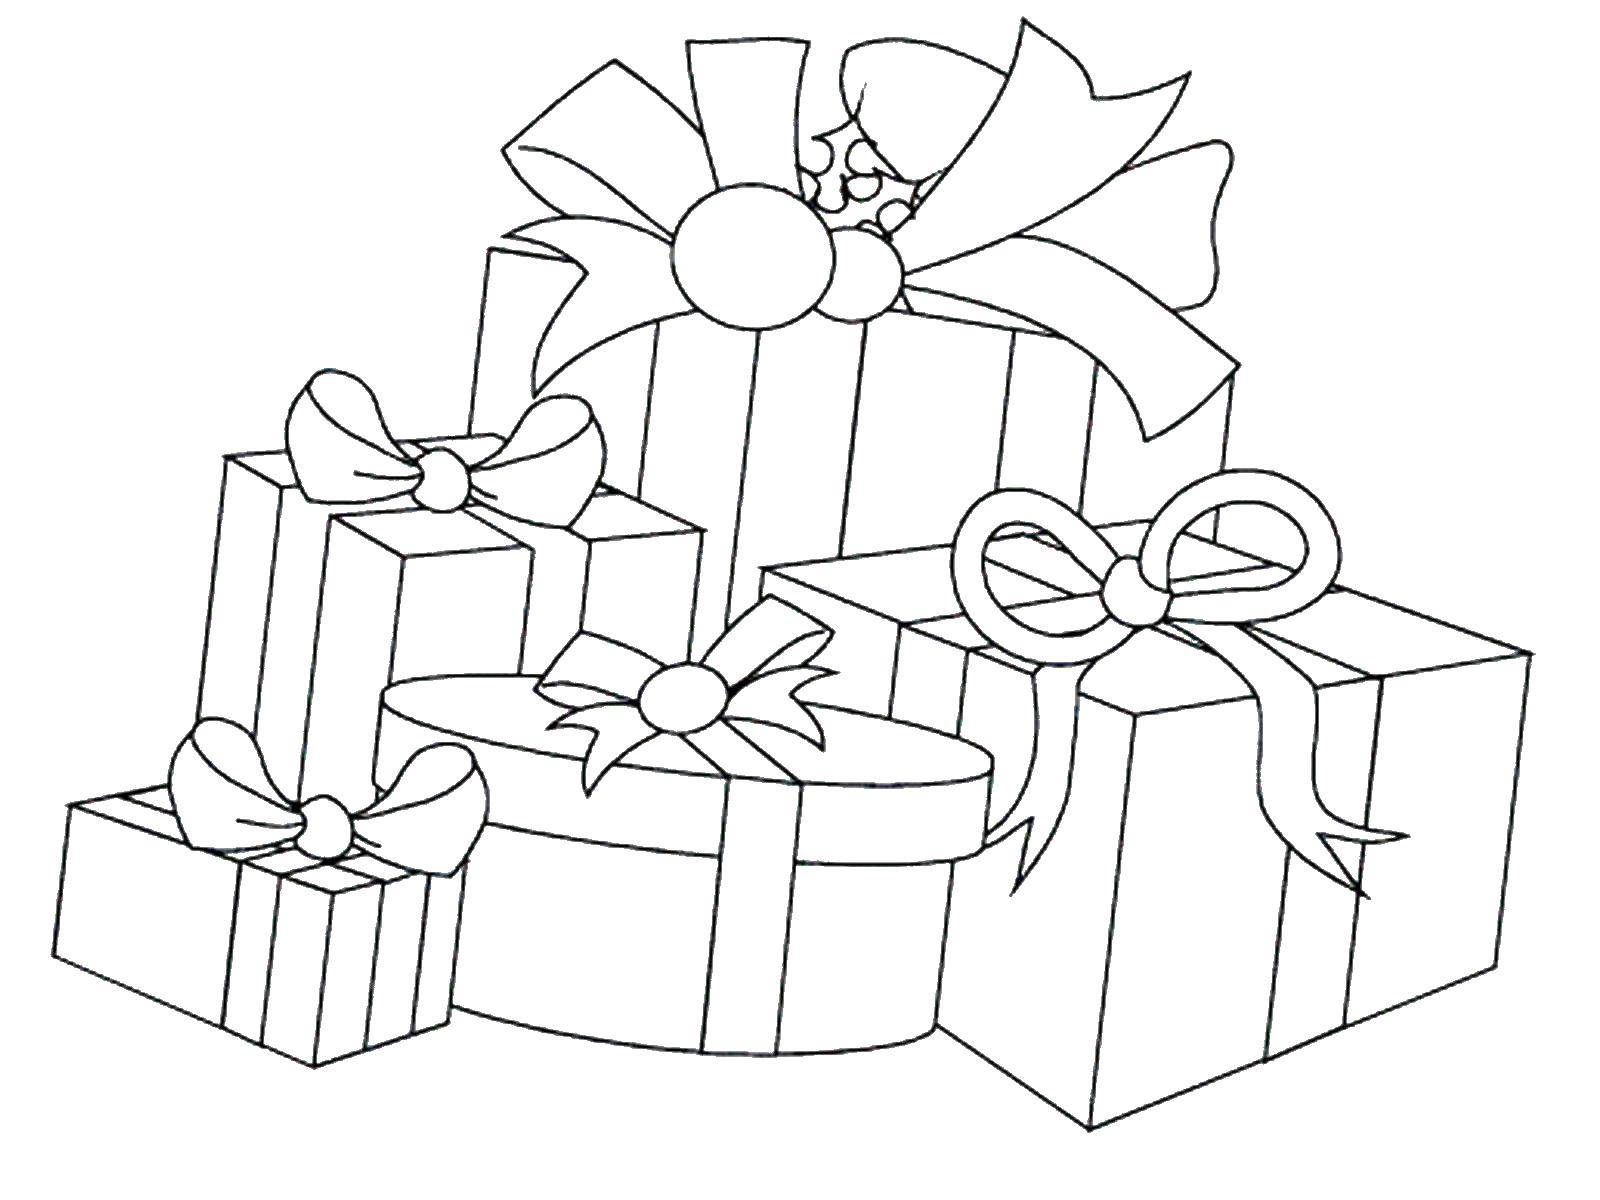 Coloring Boxes with Christmas gifts. Category snow. Tags:  gifts.